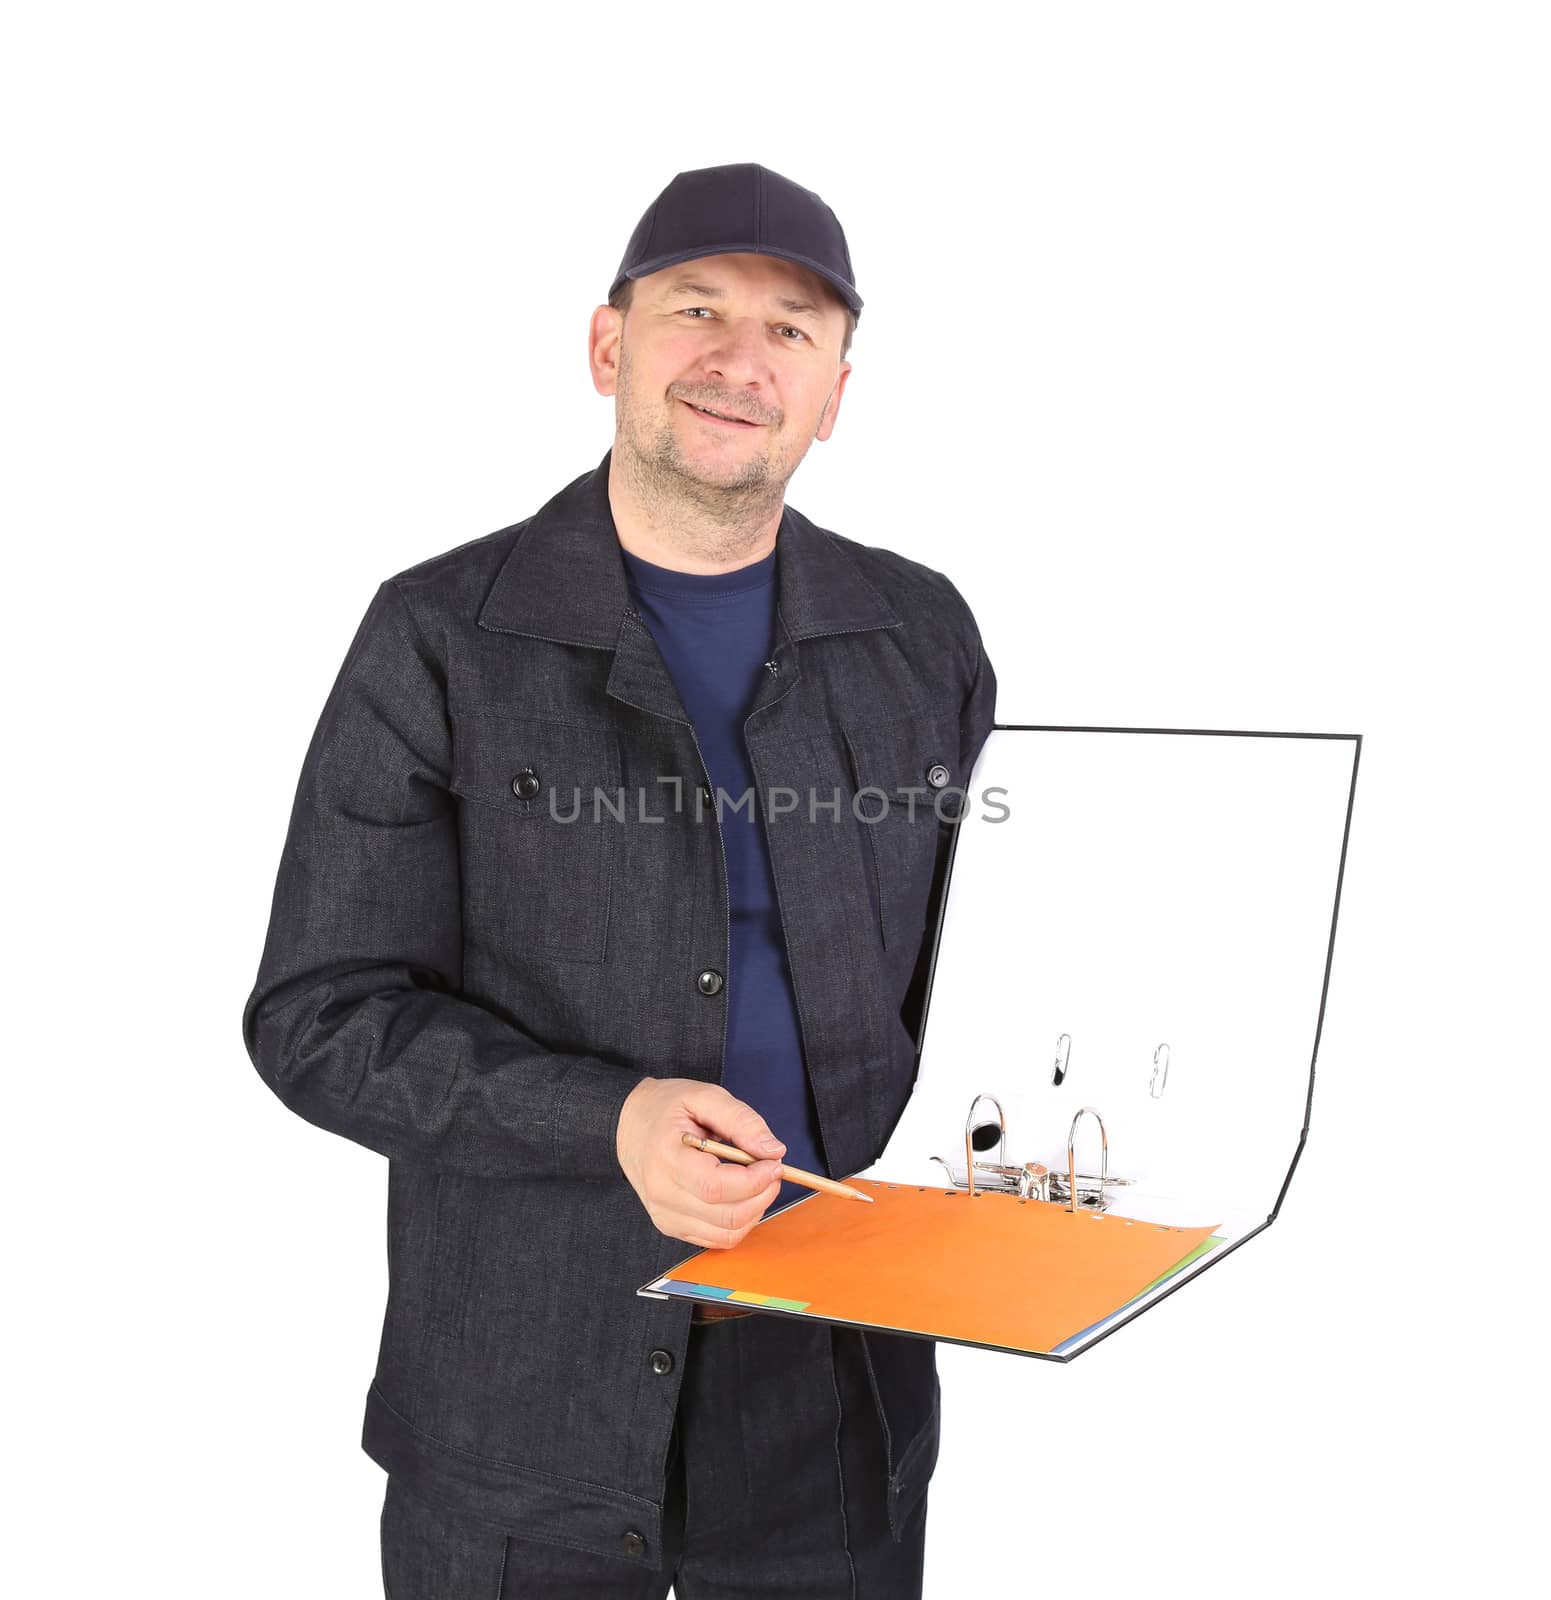 Worker in cap with opened folder. Isolated on a white background.